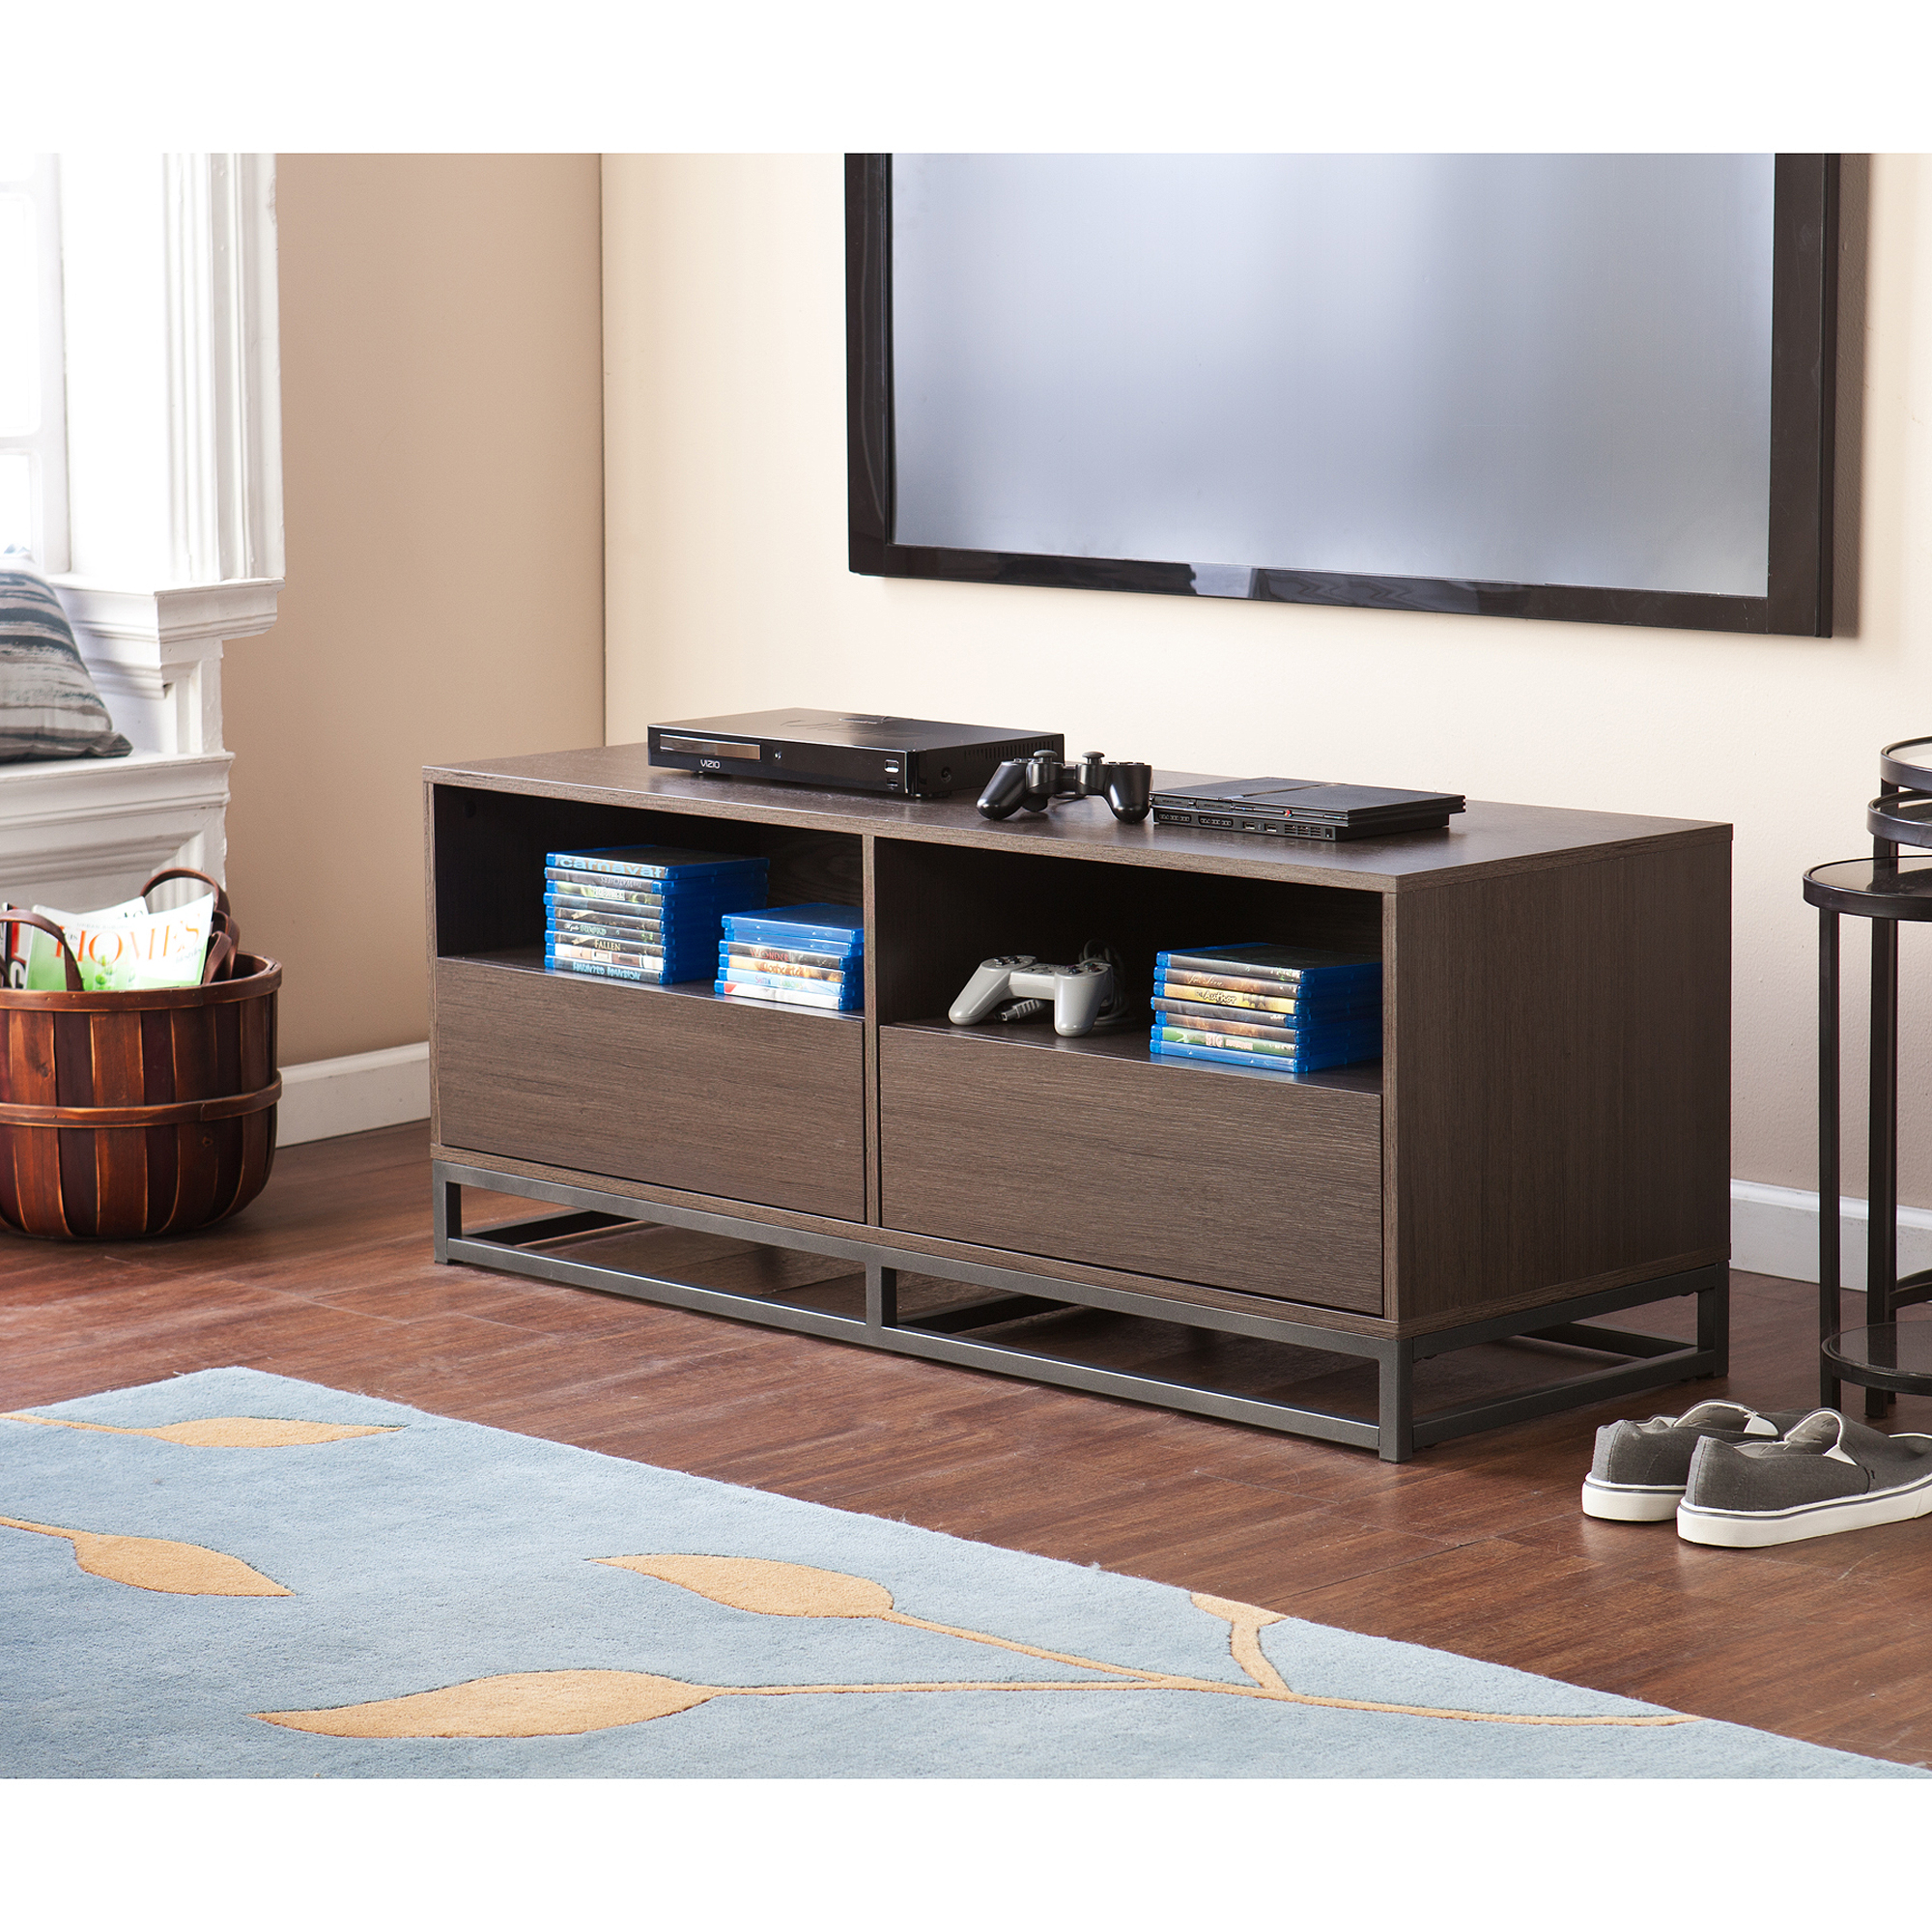 Holly & Martin Mirks TV Stand for TVs up to 46'', Burnt Oak